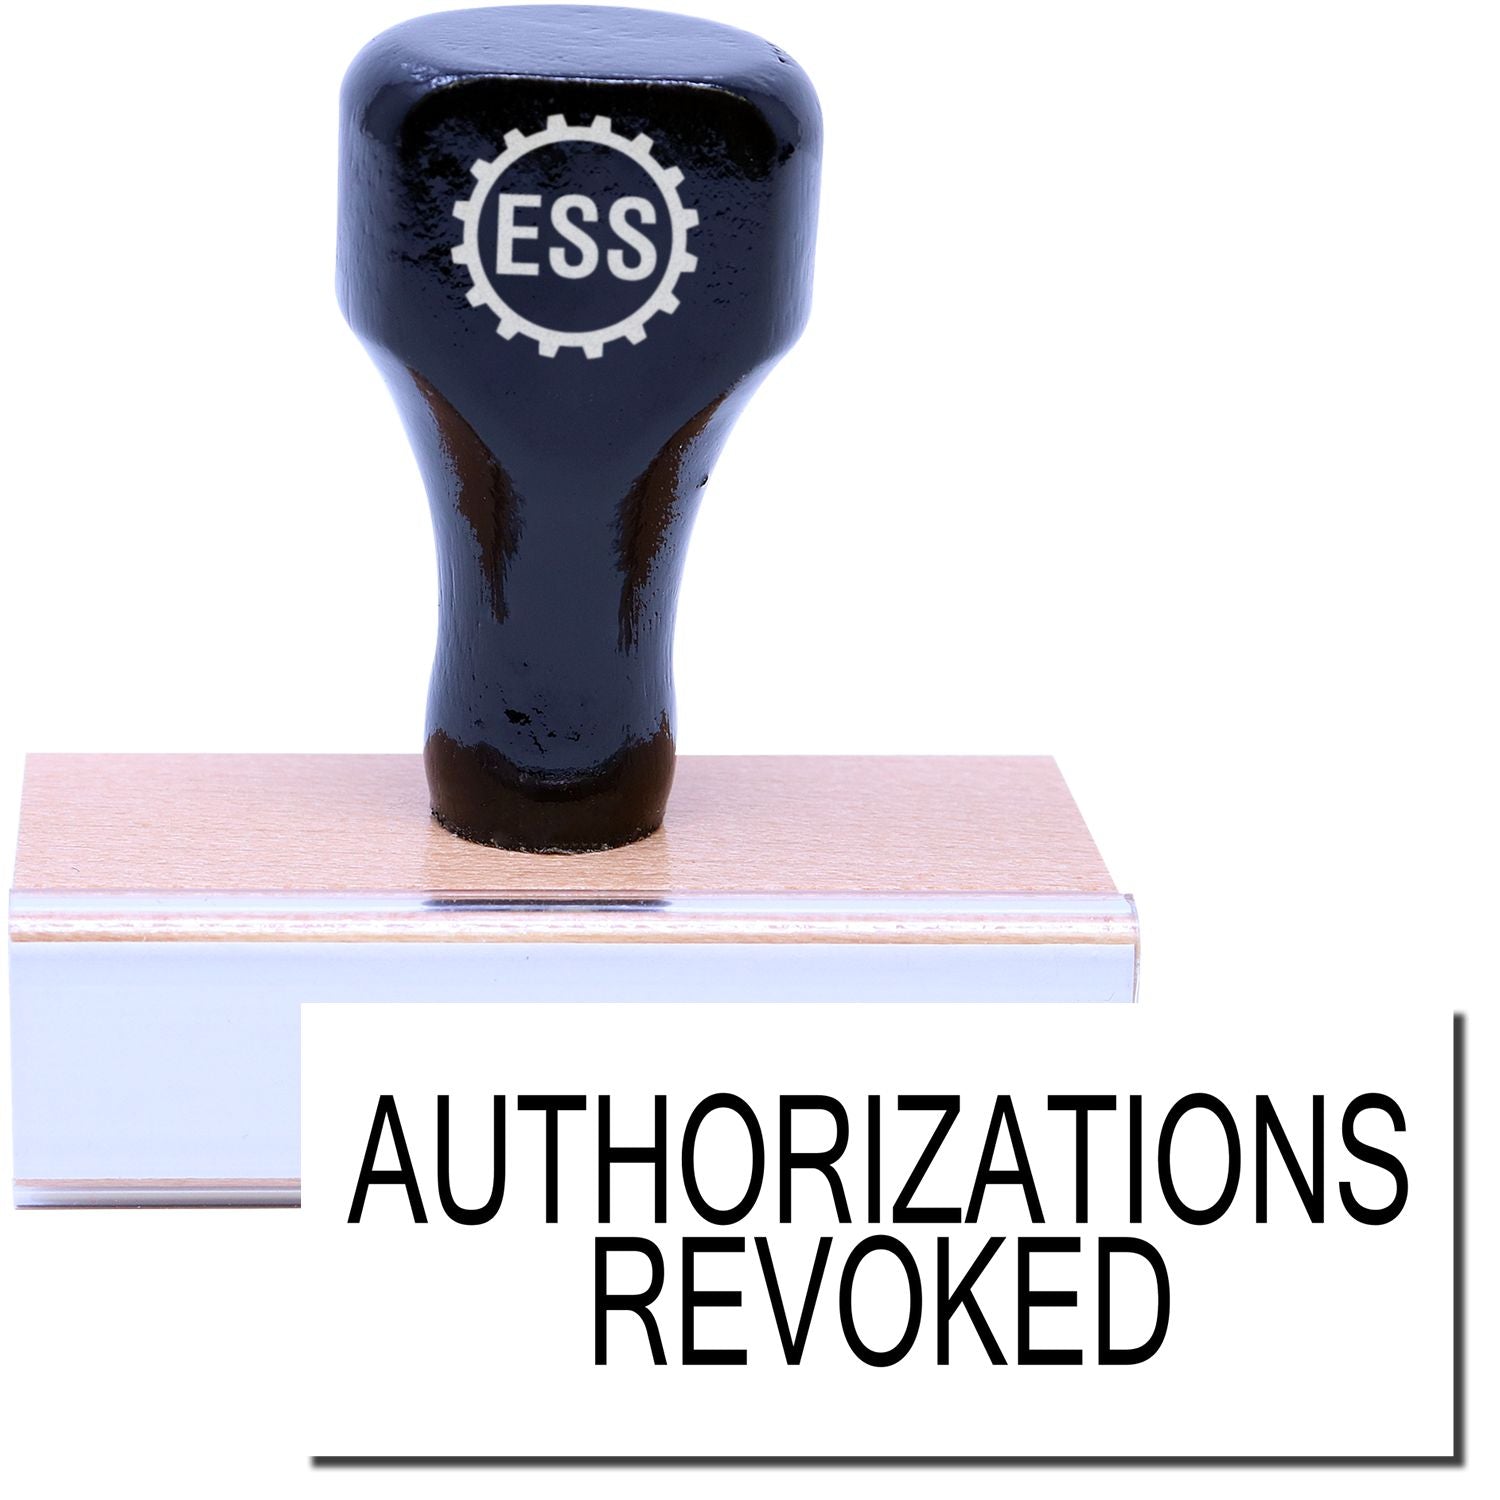 A stock office rubber stamp with a stamped image showing how the text "AUTHORIZATIONS REVOKED" is displayed after stamping.